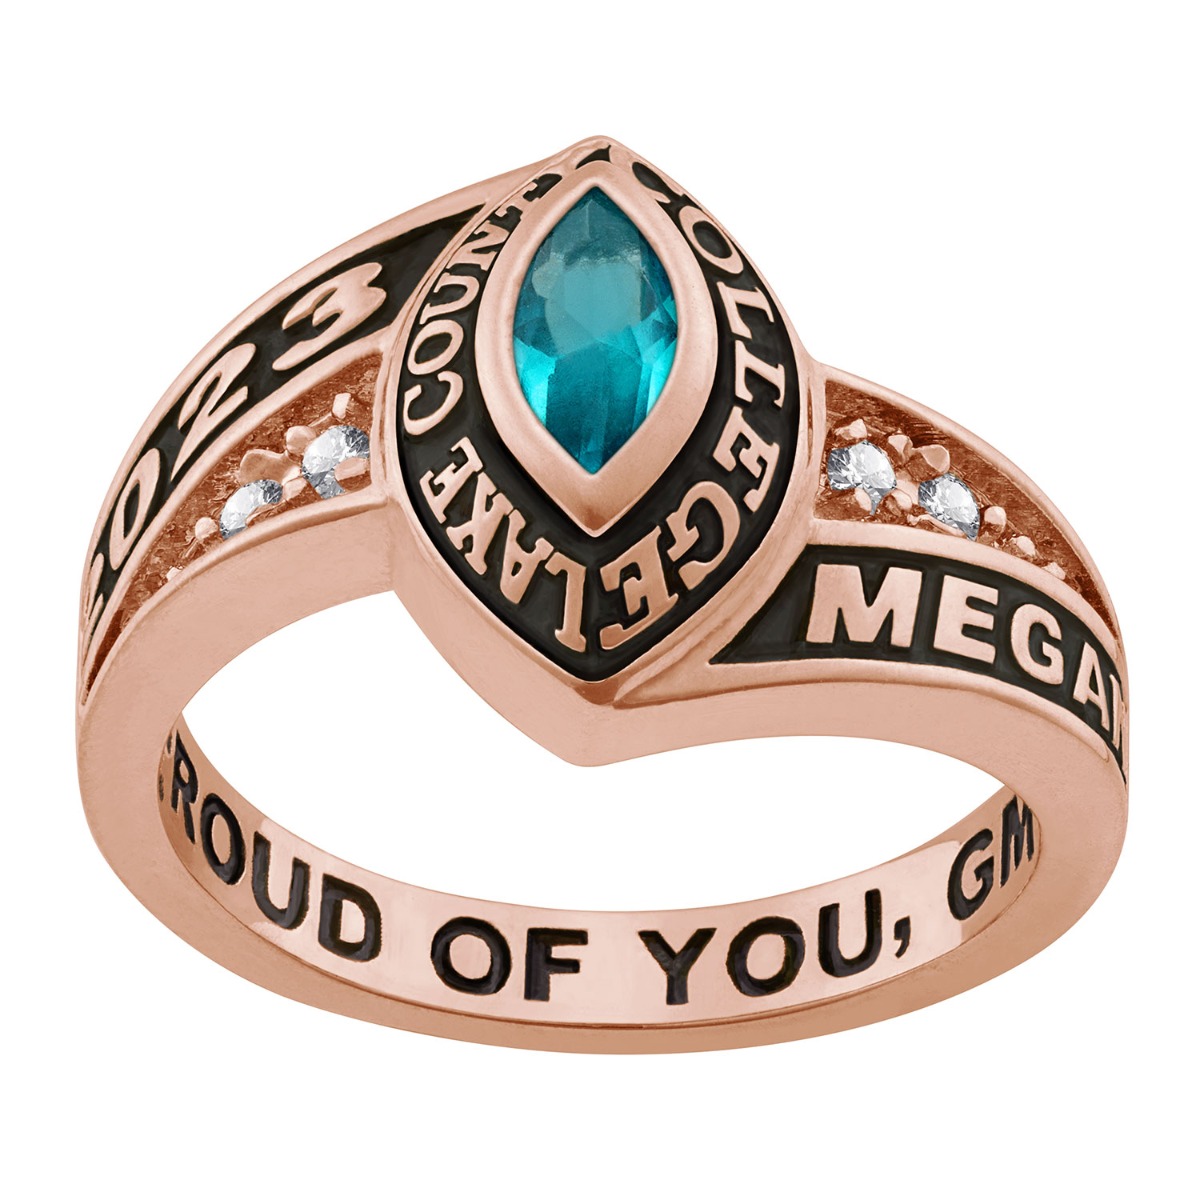 Ladies 14K Rose Gold over Sterling Marquise Birthstone and CZ Class Ring